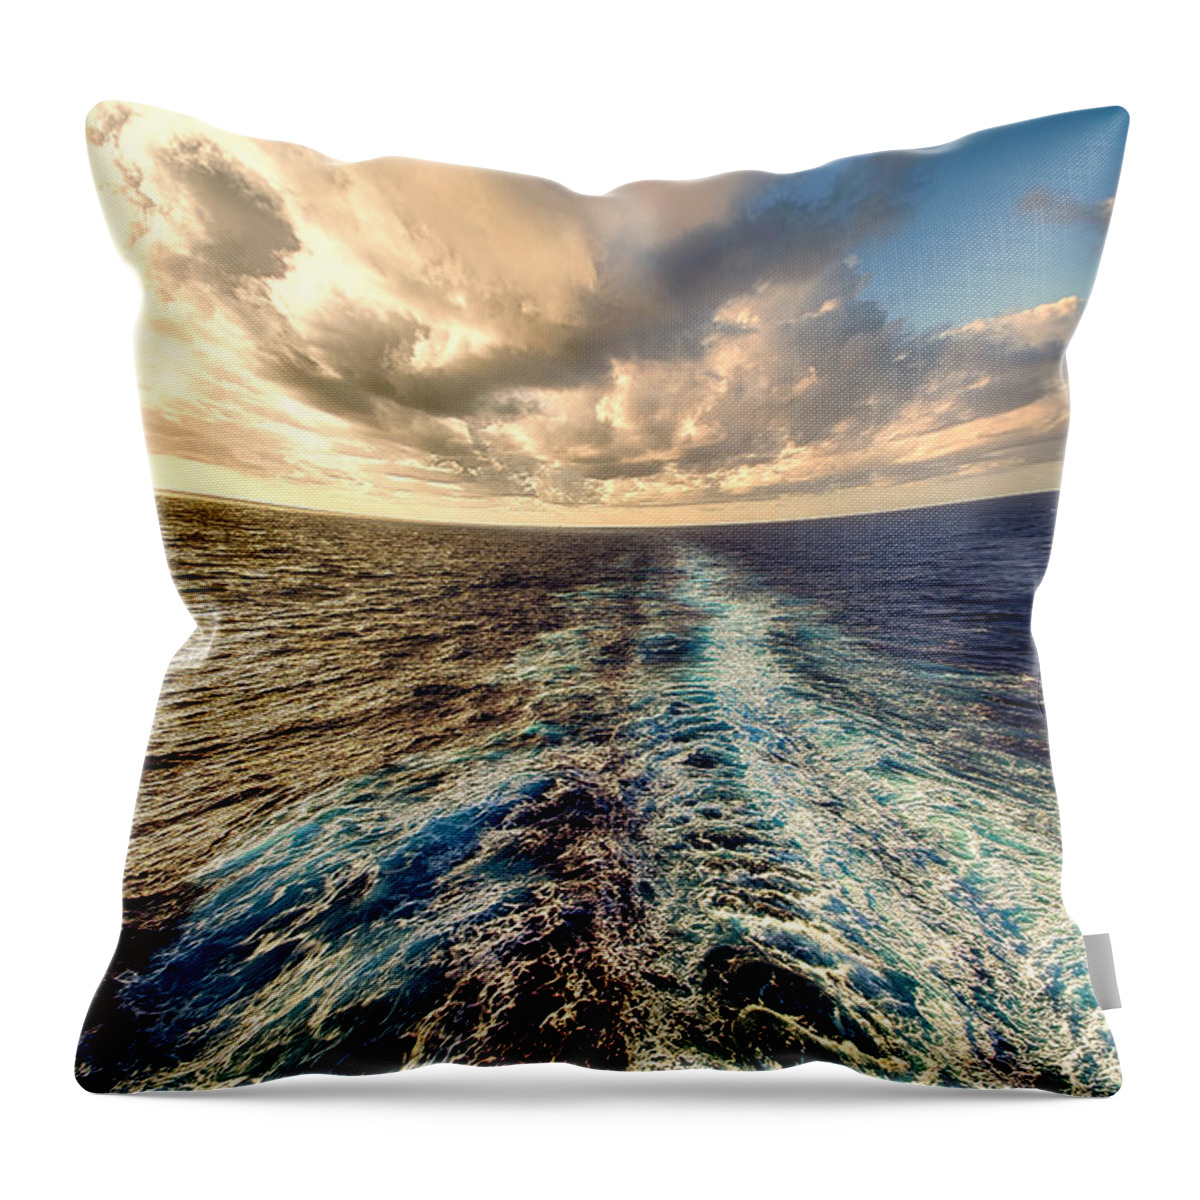 Landscape Throw Pillow featuring the photograph In My Wake by Bill and Linda Tiepelman